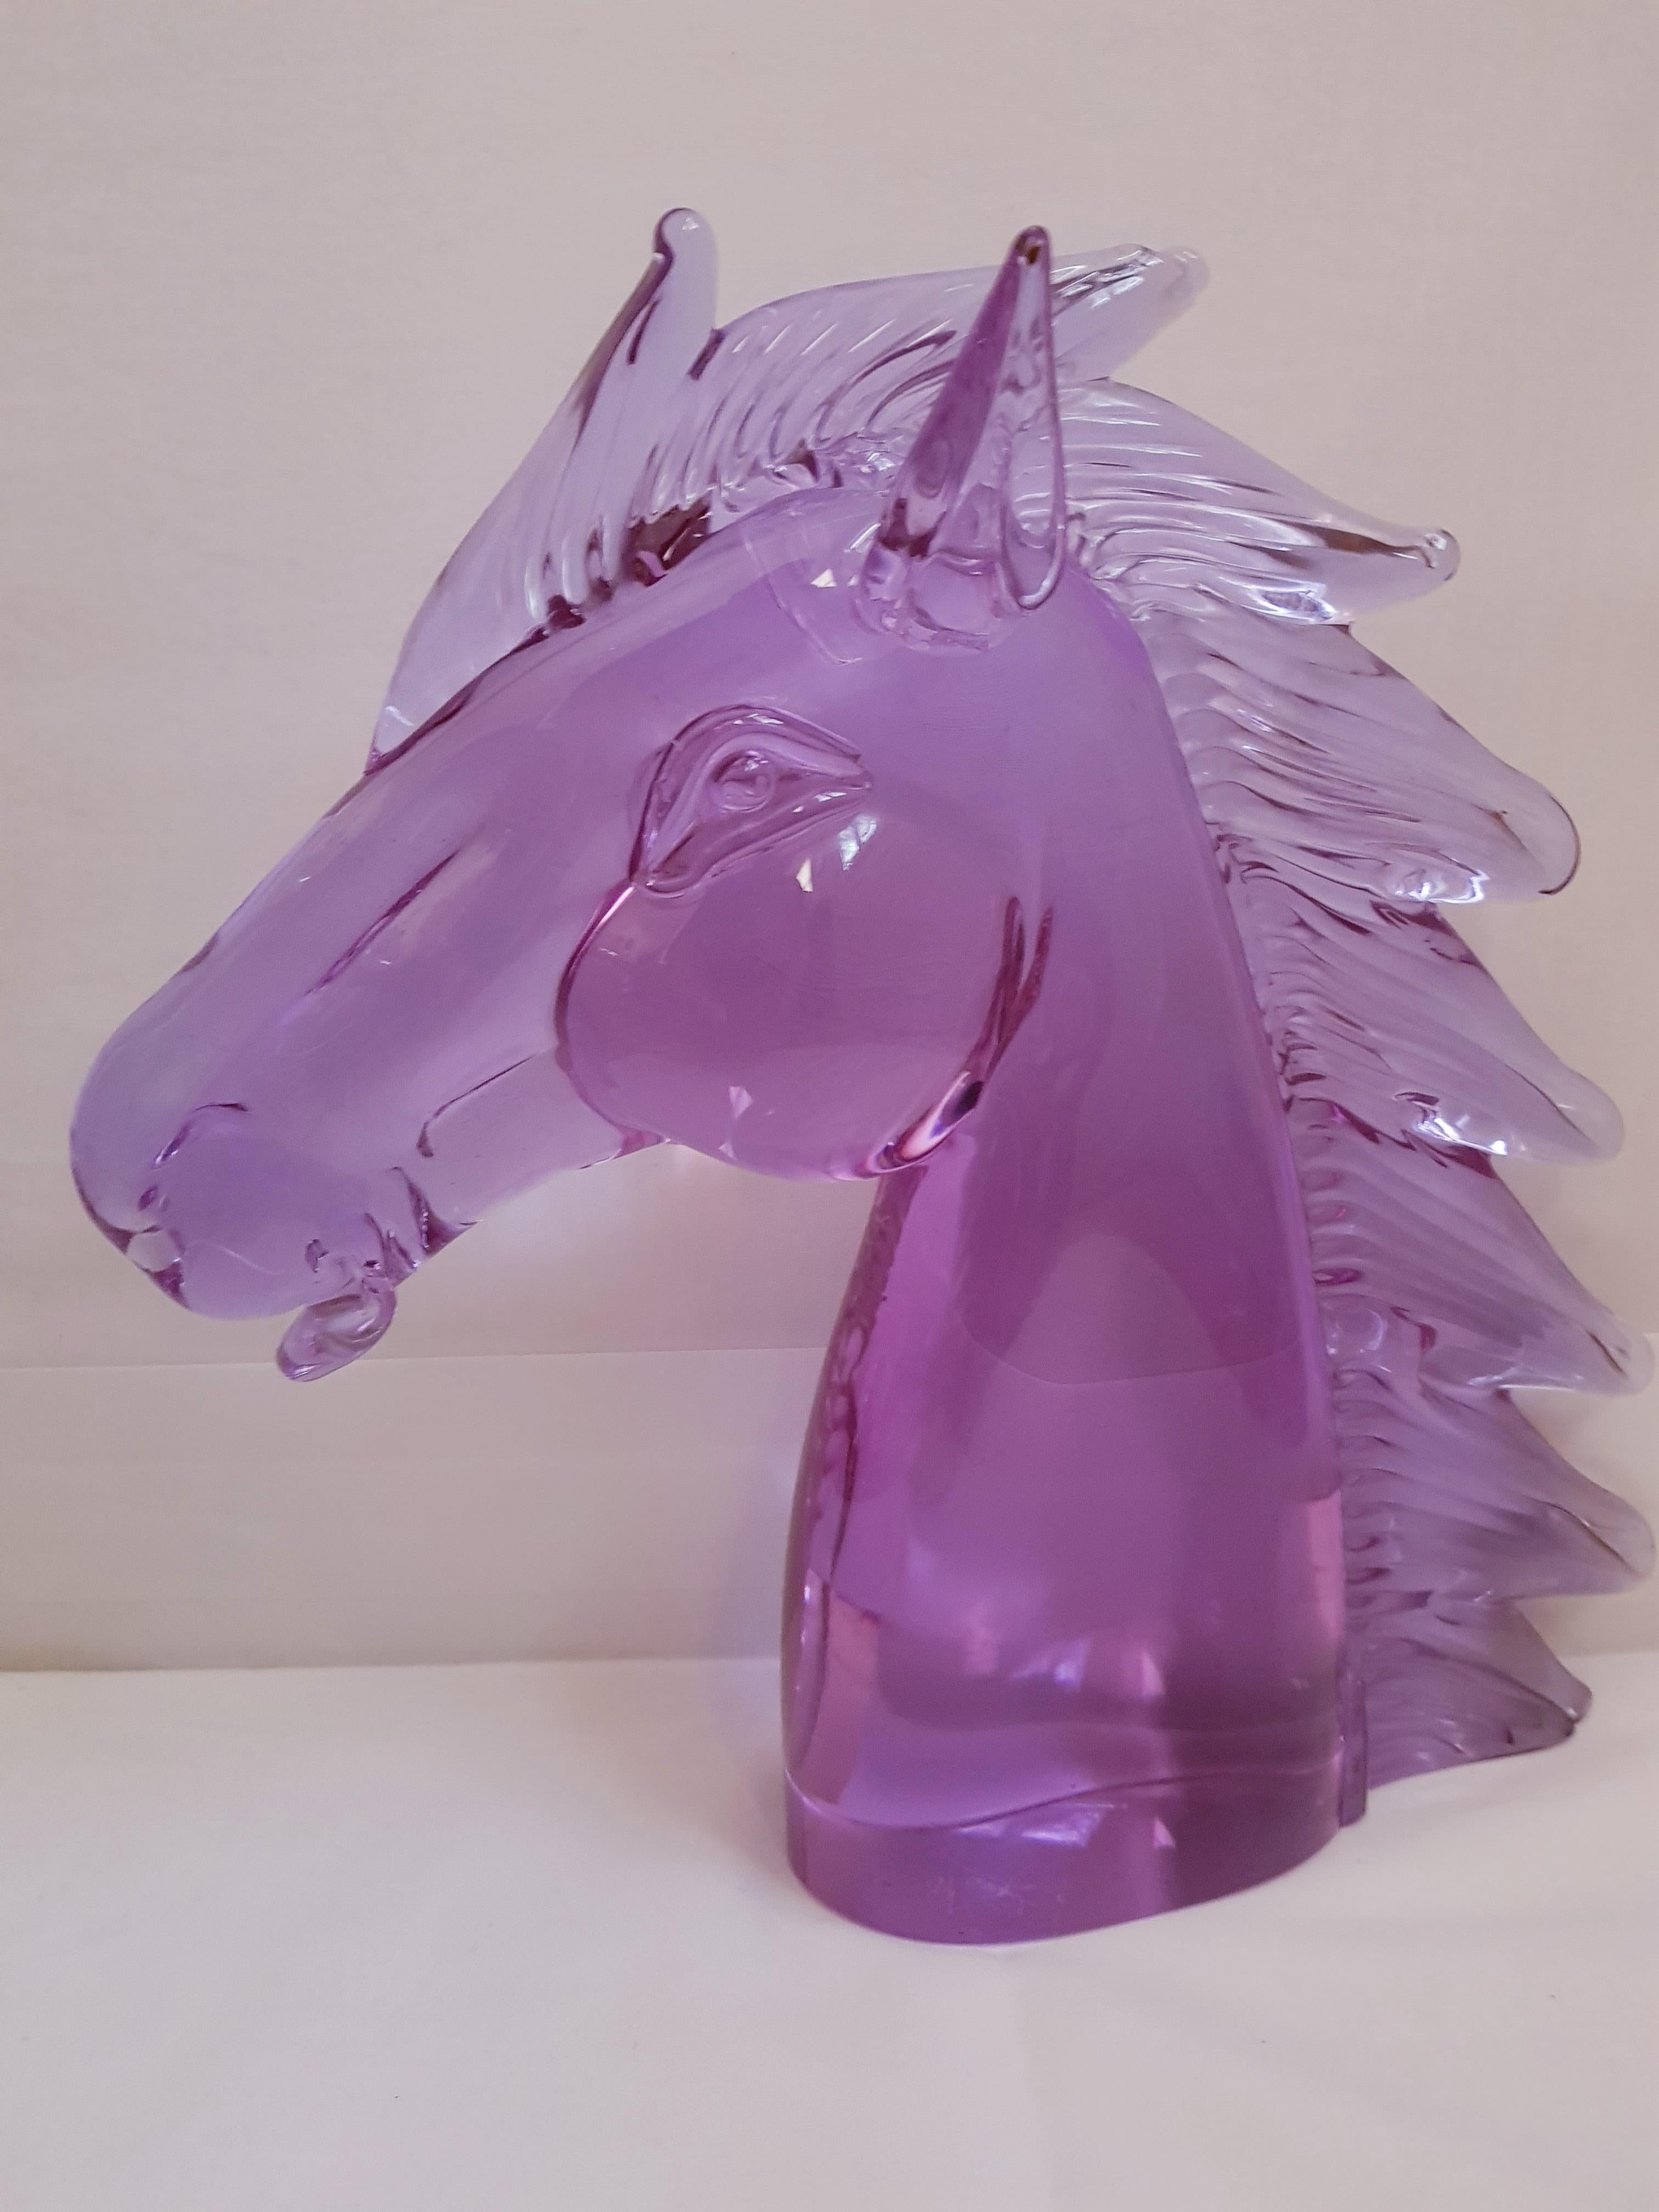 Beautiful vitange Murano glass alexandrite neodymium colour-changing horse head, signed by the artist Licio Zanetti. This sculpture is among the largest specimen made by the artist.
The colour of the sculpture changes to pink by black light and to